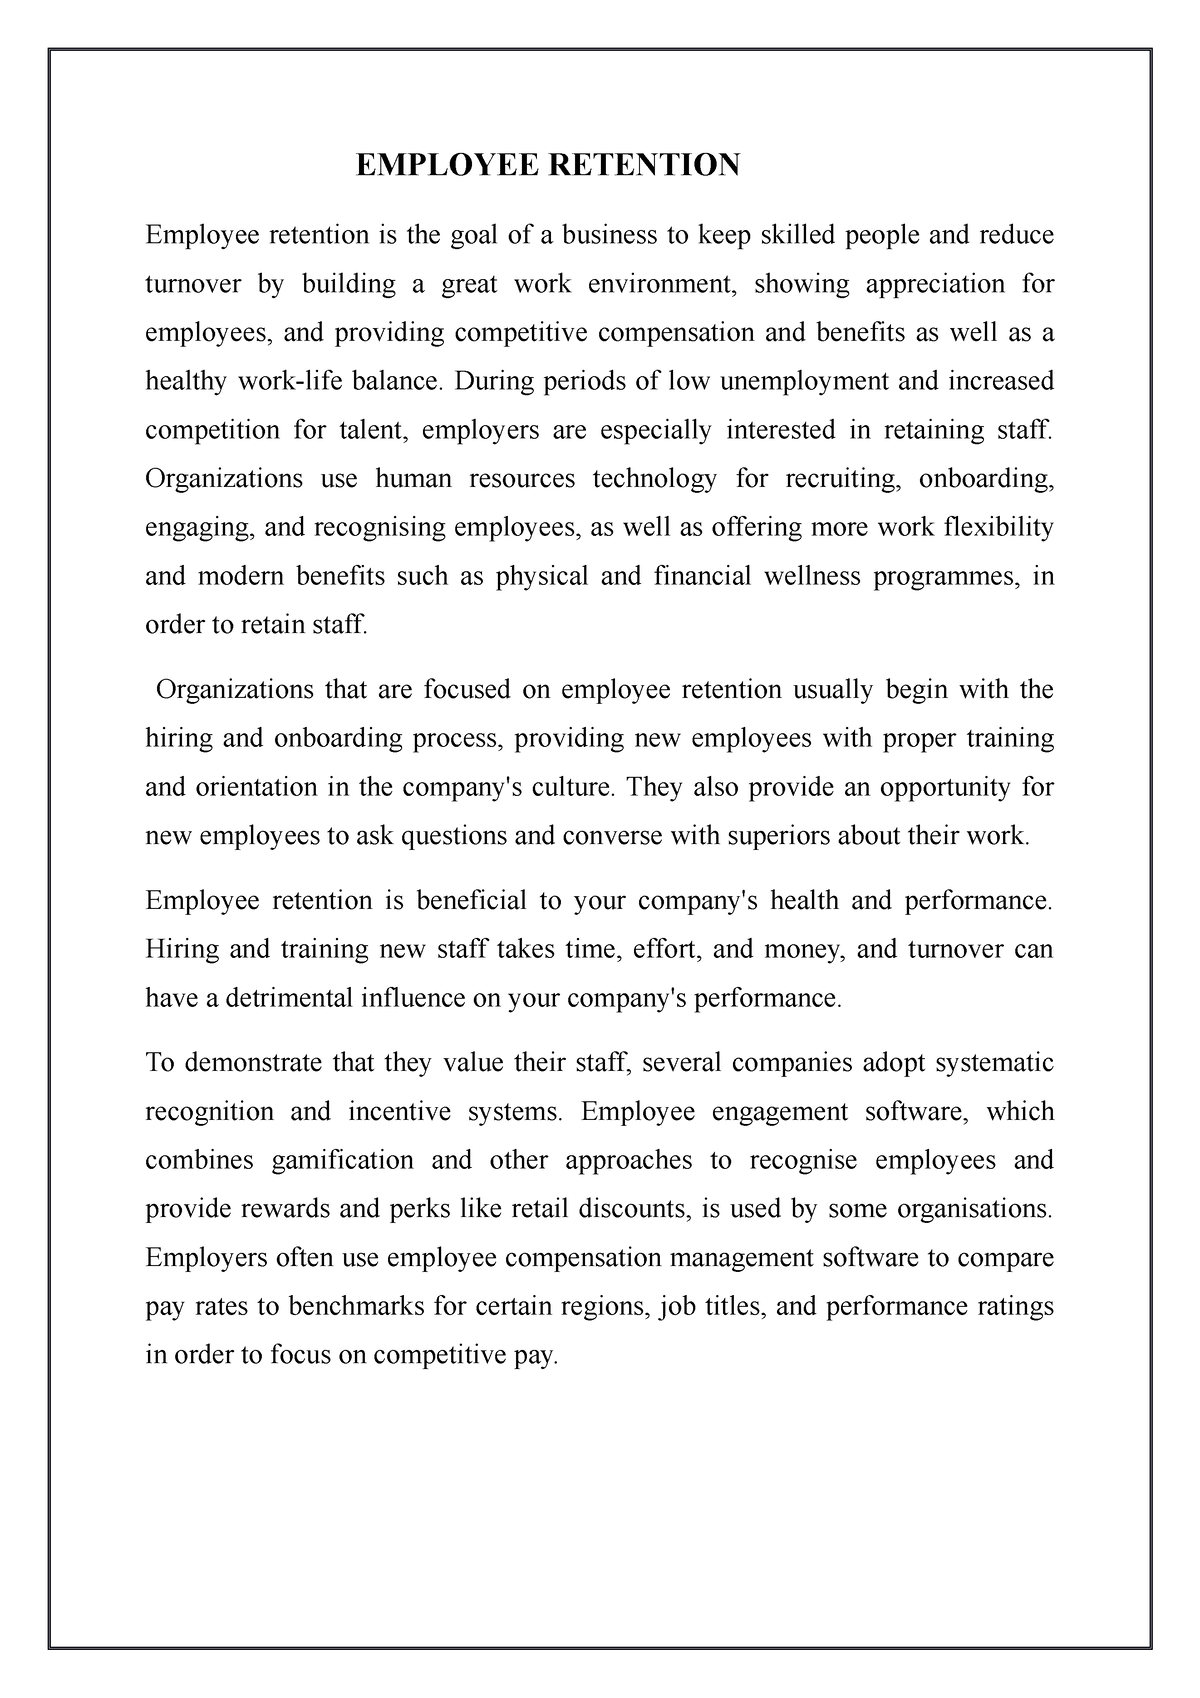 research proposal on employee retention